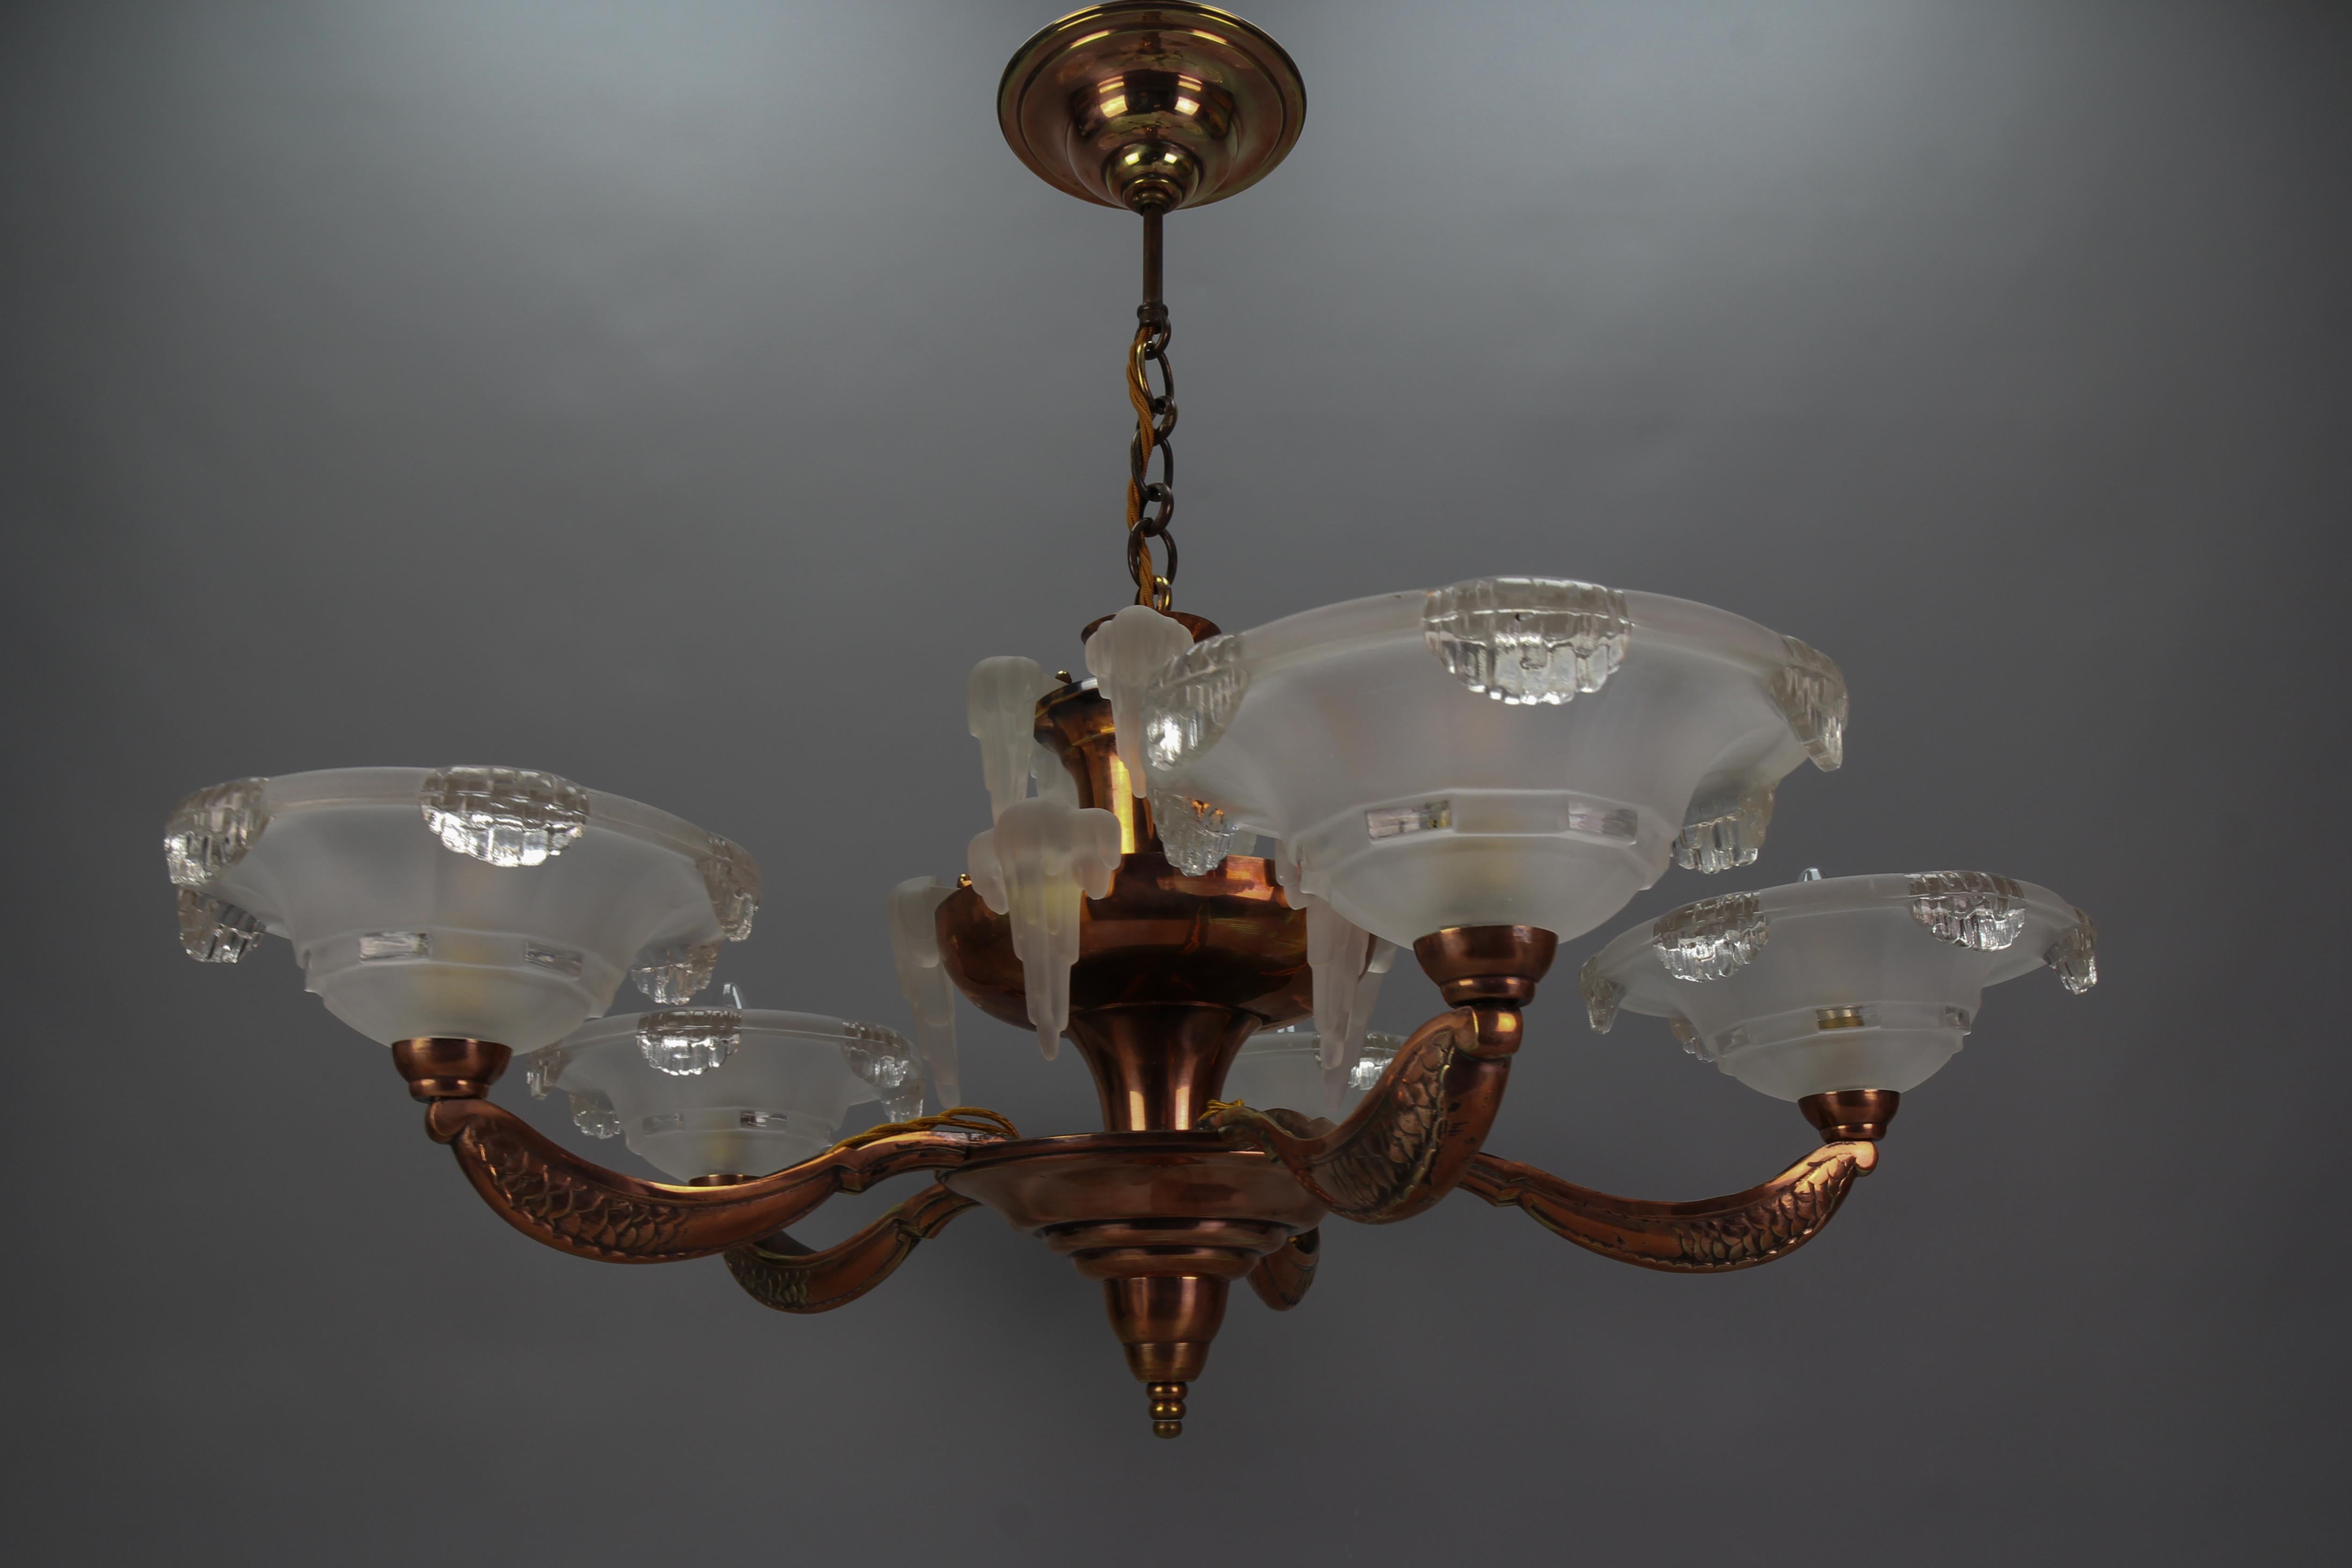 French Art Deco 7-Light Frosted Glass, Brass and Copper Chandelier, 1930s For Sale 2